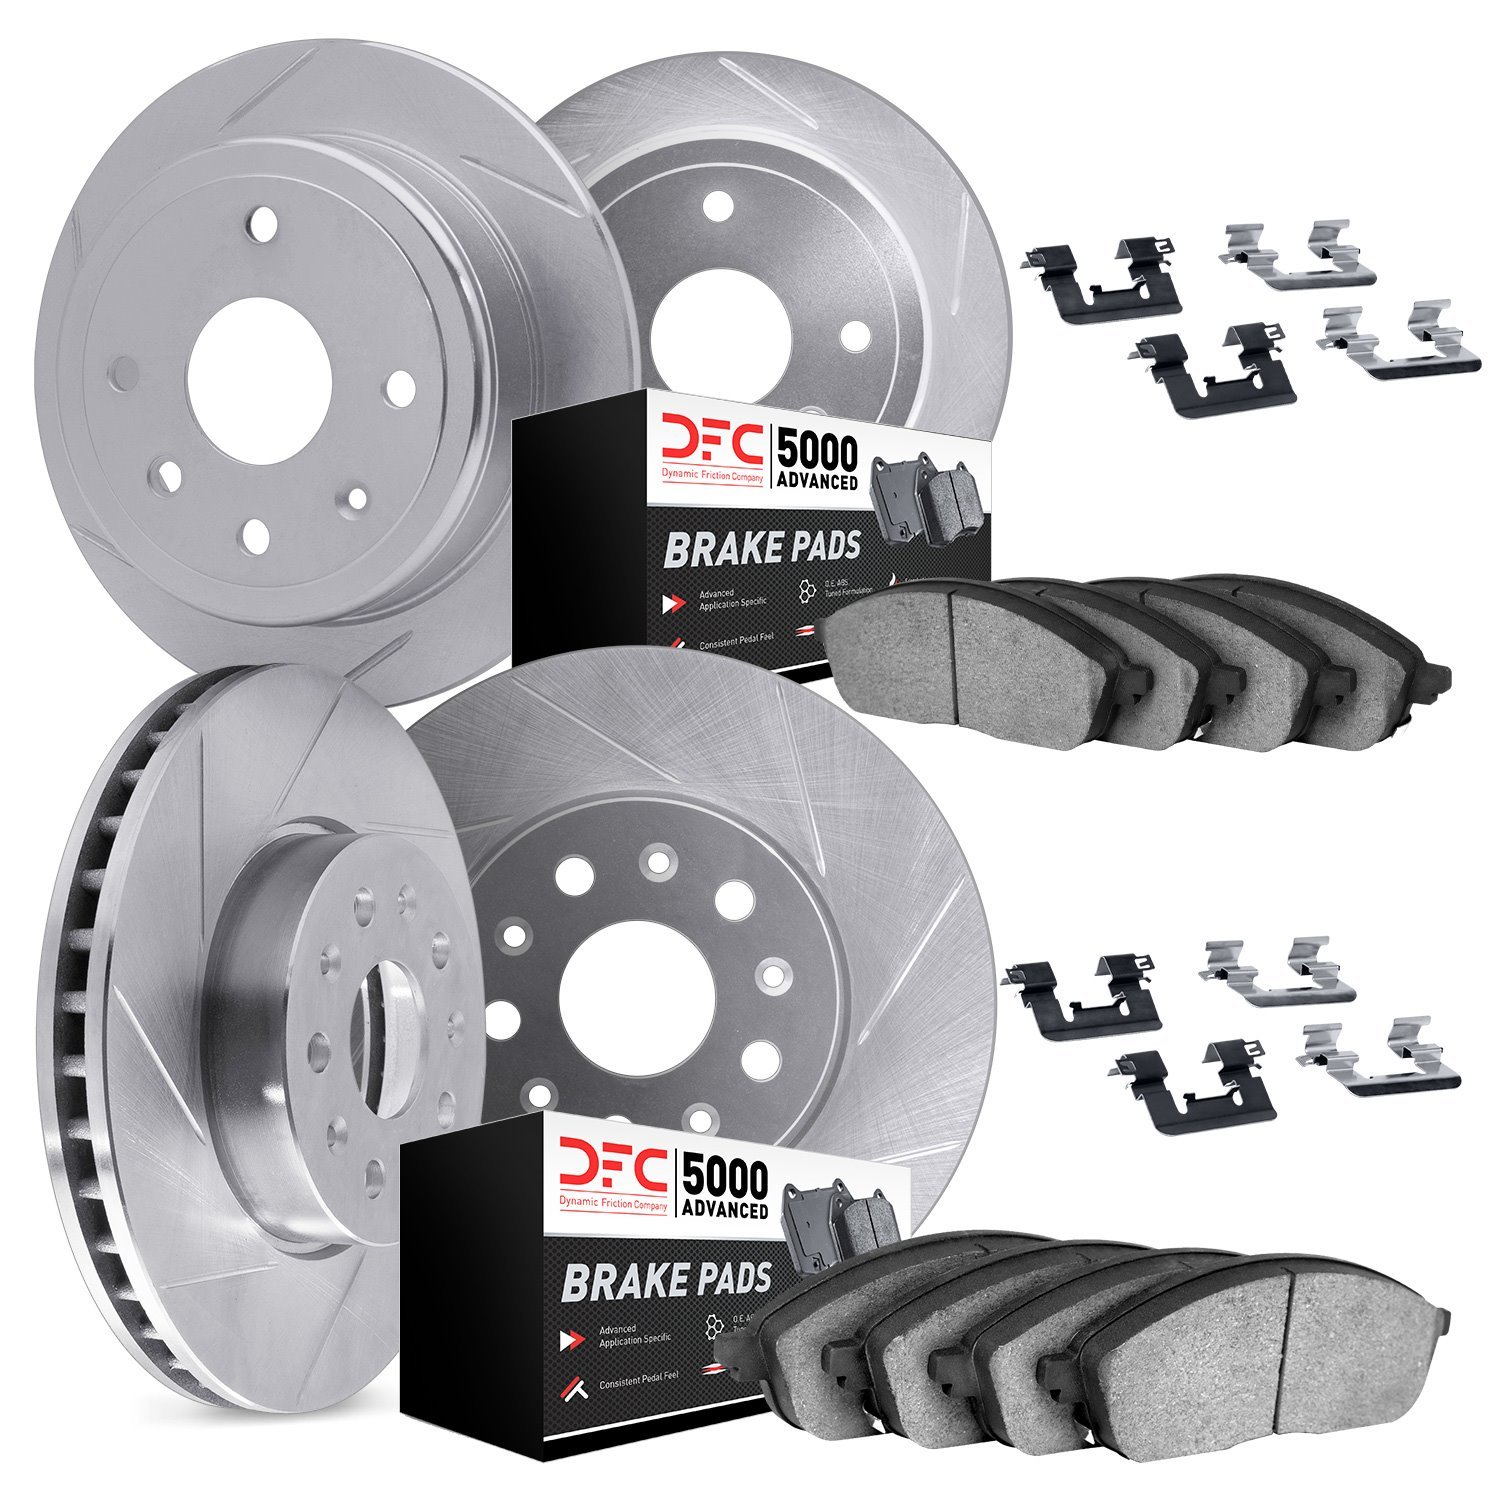 5514-39028 Slotted Brake Rotors w/5000 Advanced Brake Pads Kit & Hardware [Silver], Fits Select Mopar, Position: Front and Rear